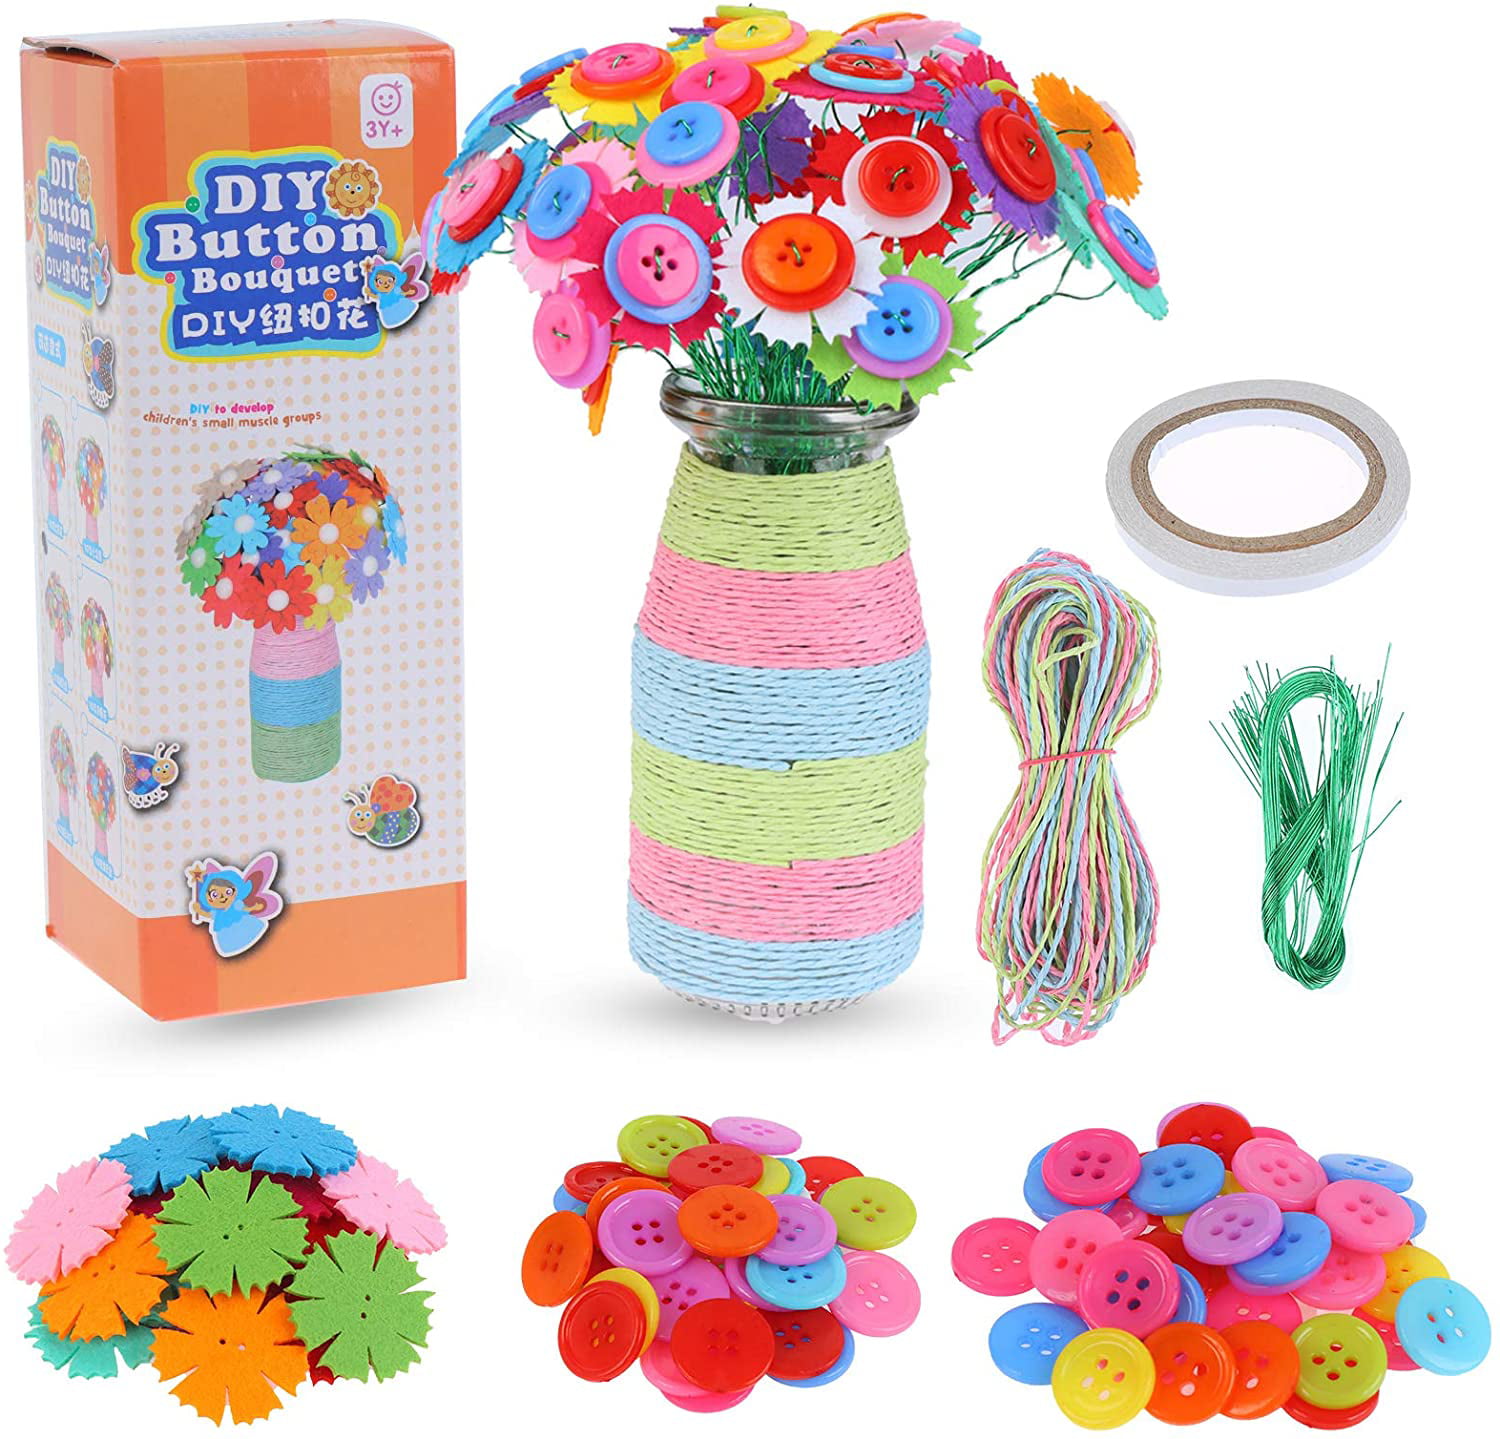 Refasy Flower Craft Kit for Kids Activities Projects Fun DIY Craft Kit for Children 